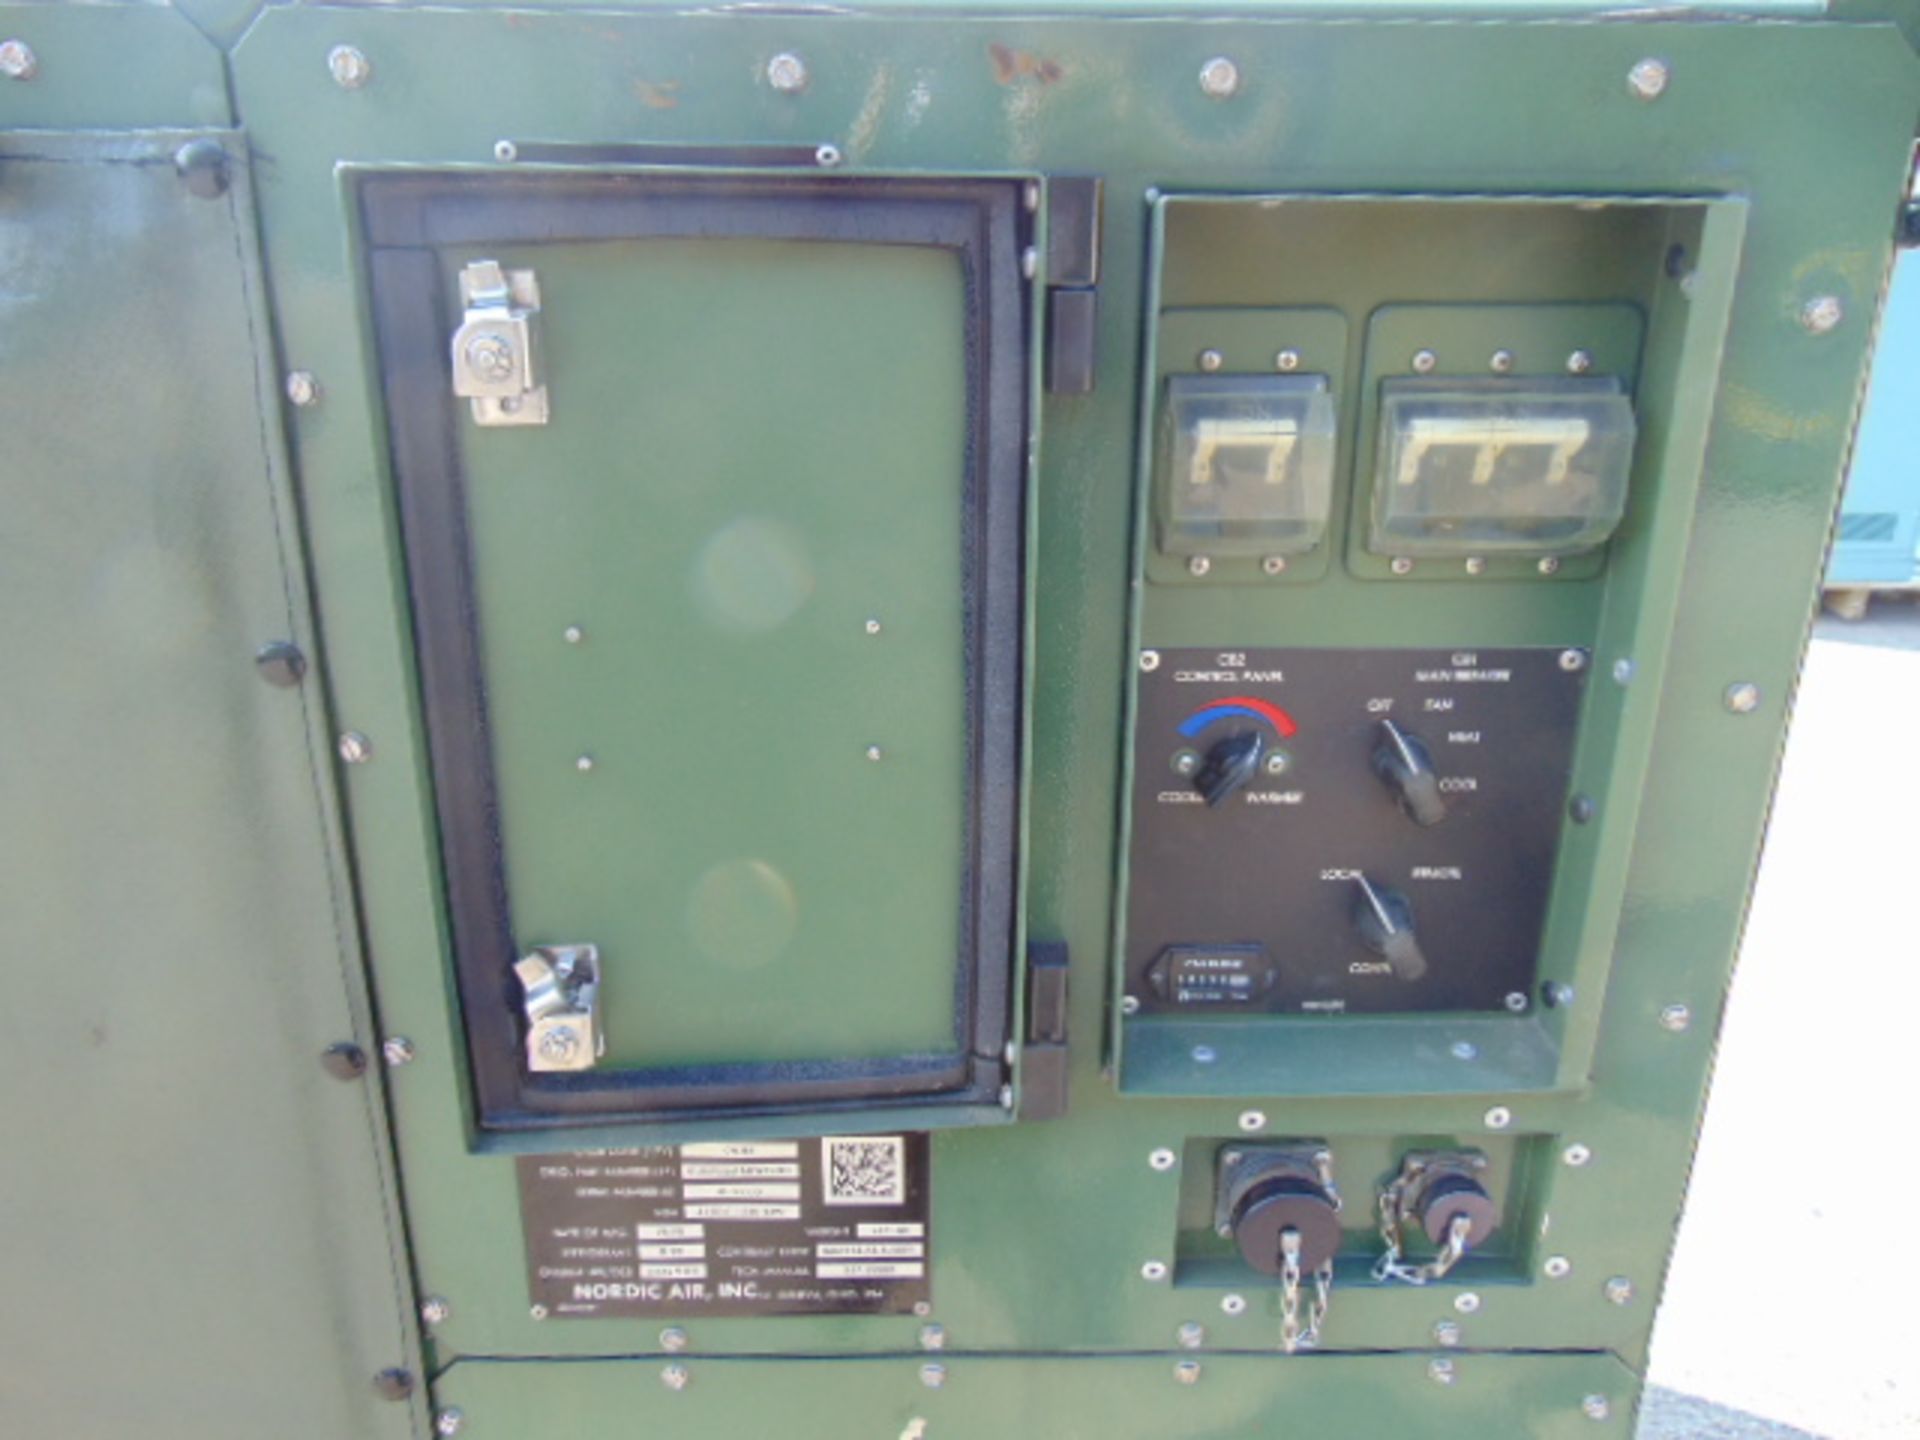 Nordic Air 0WJE1 36,000 BTUH 3 Phase Environmental Control Unit - Image 10 of 21